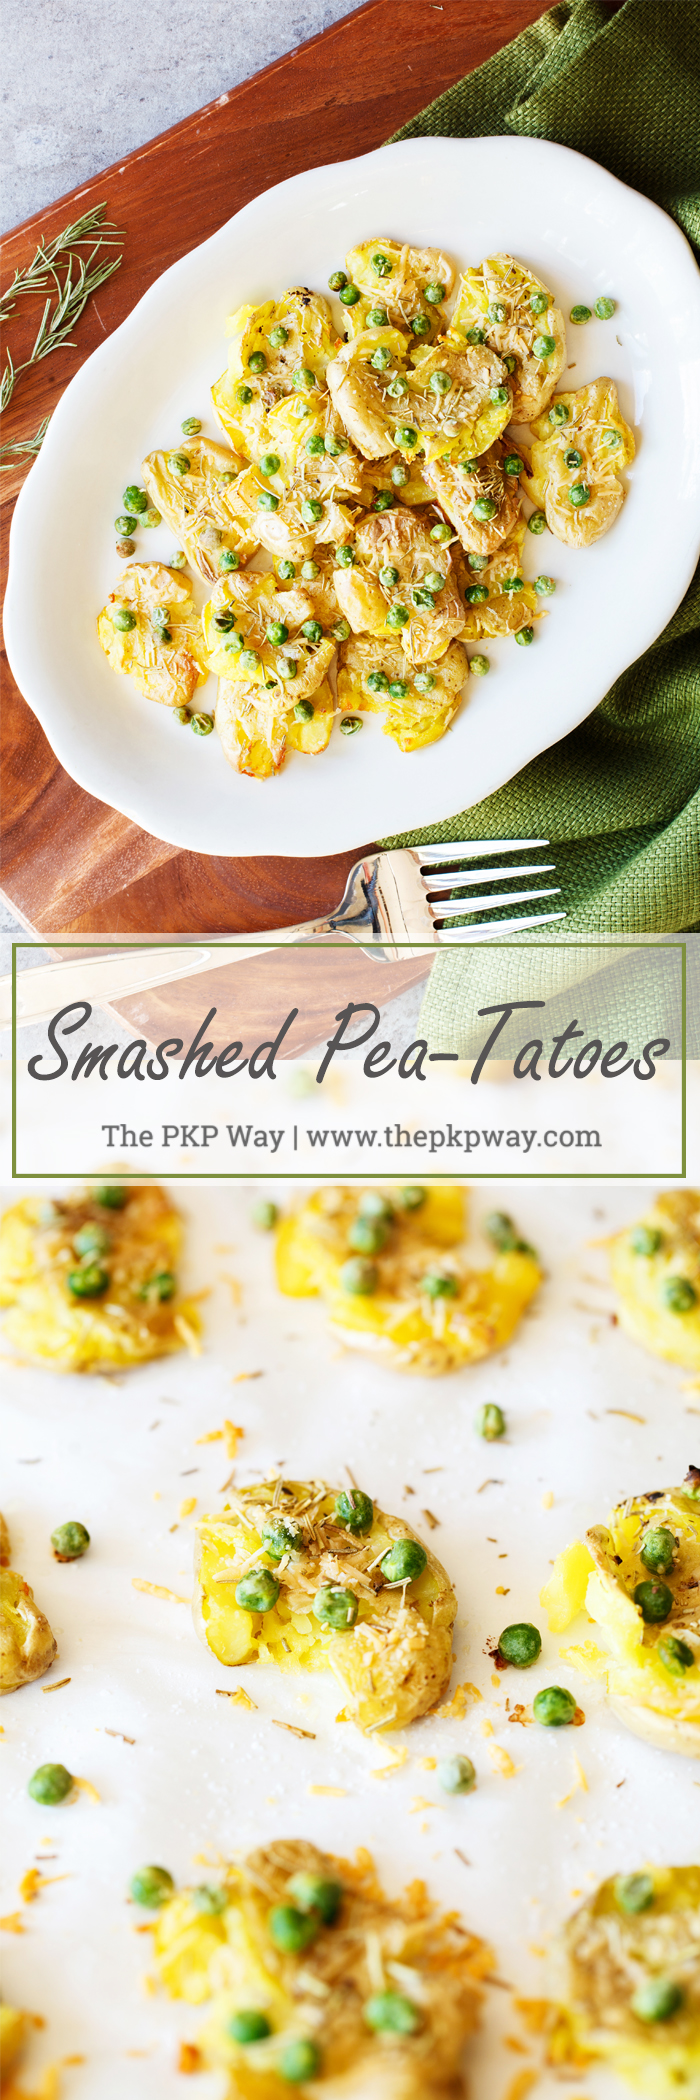 Pops of color, aromatic herbs, and nutty flavors will make these smashed pea-tatoes a beautiful addition to any holiday table.